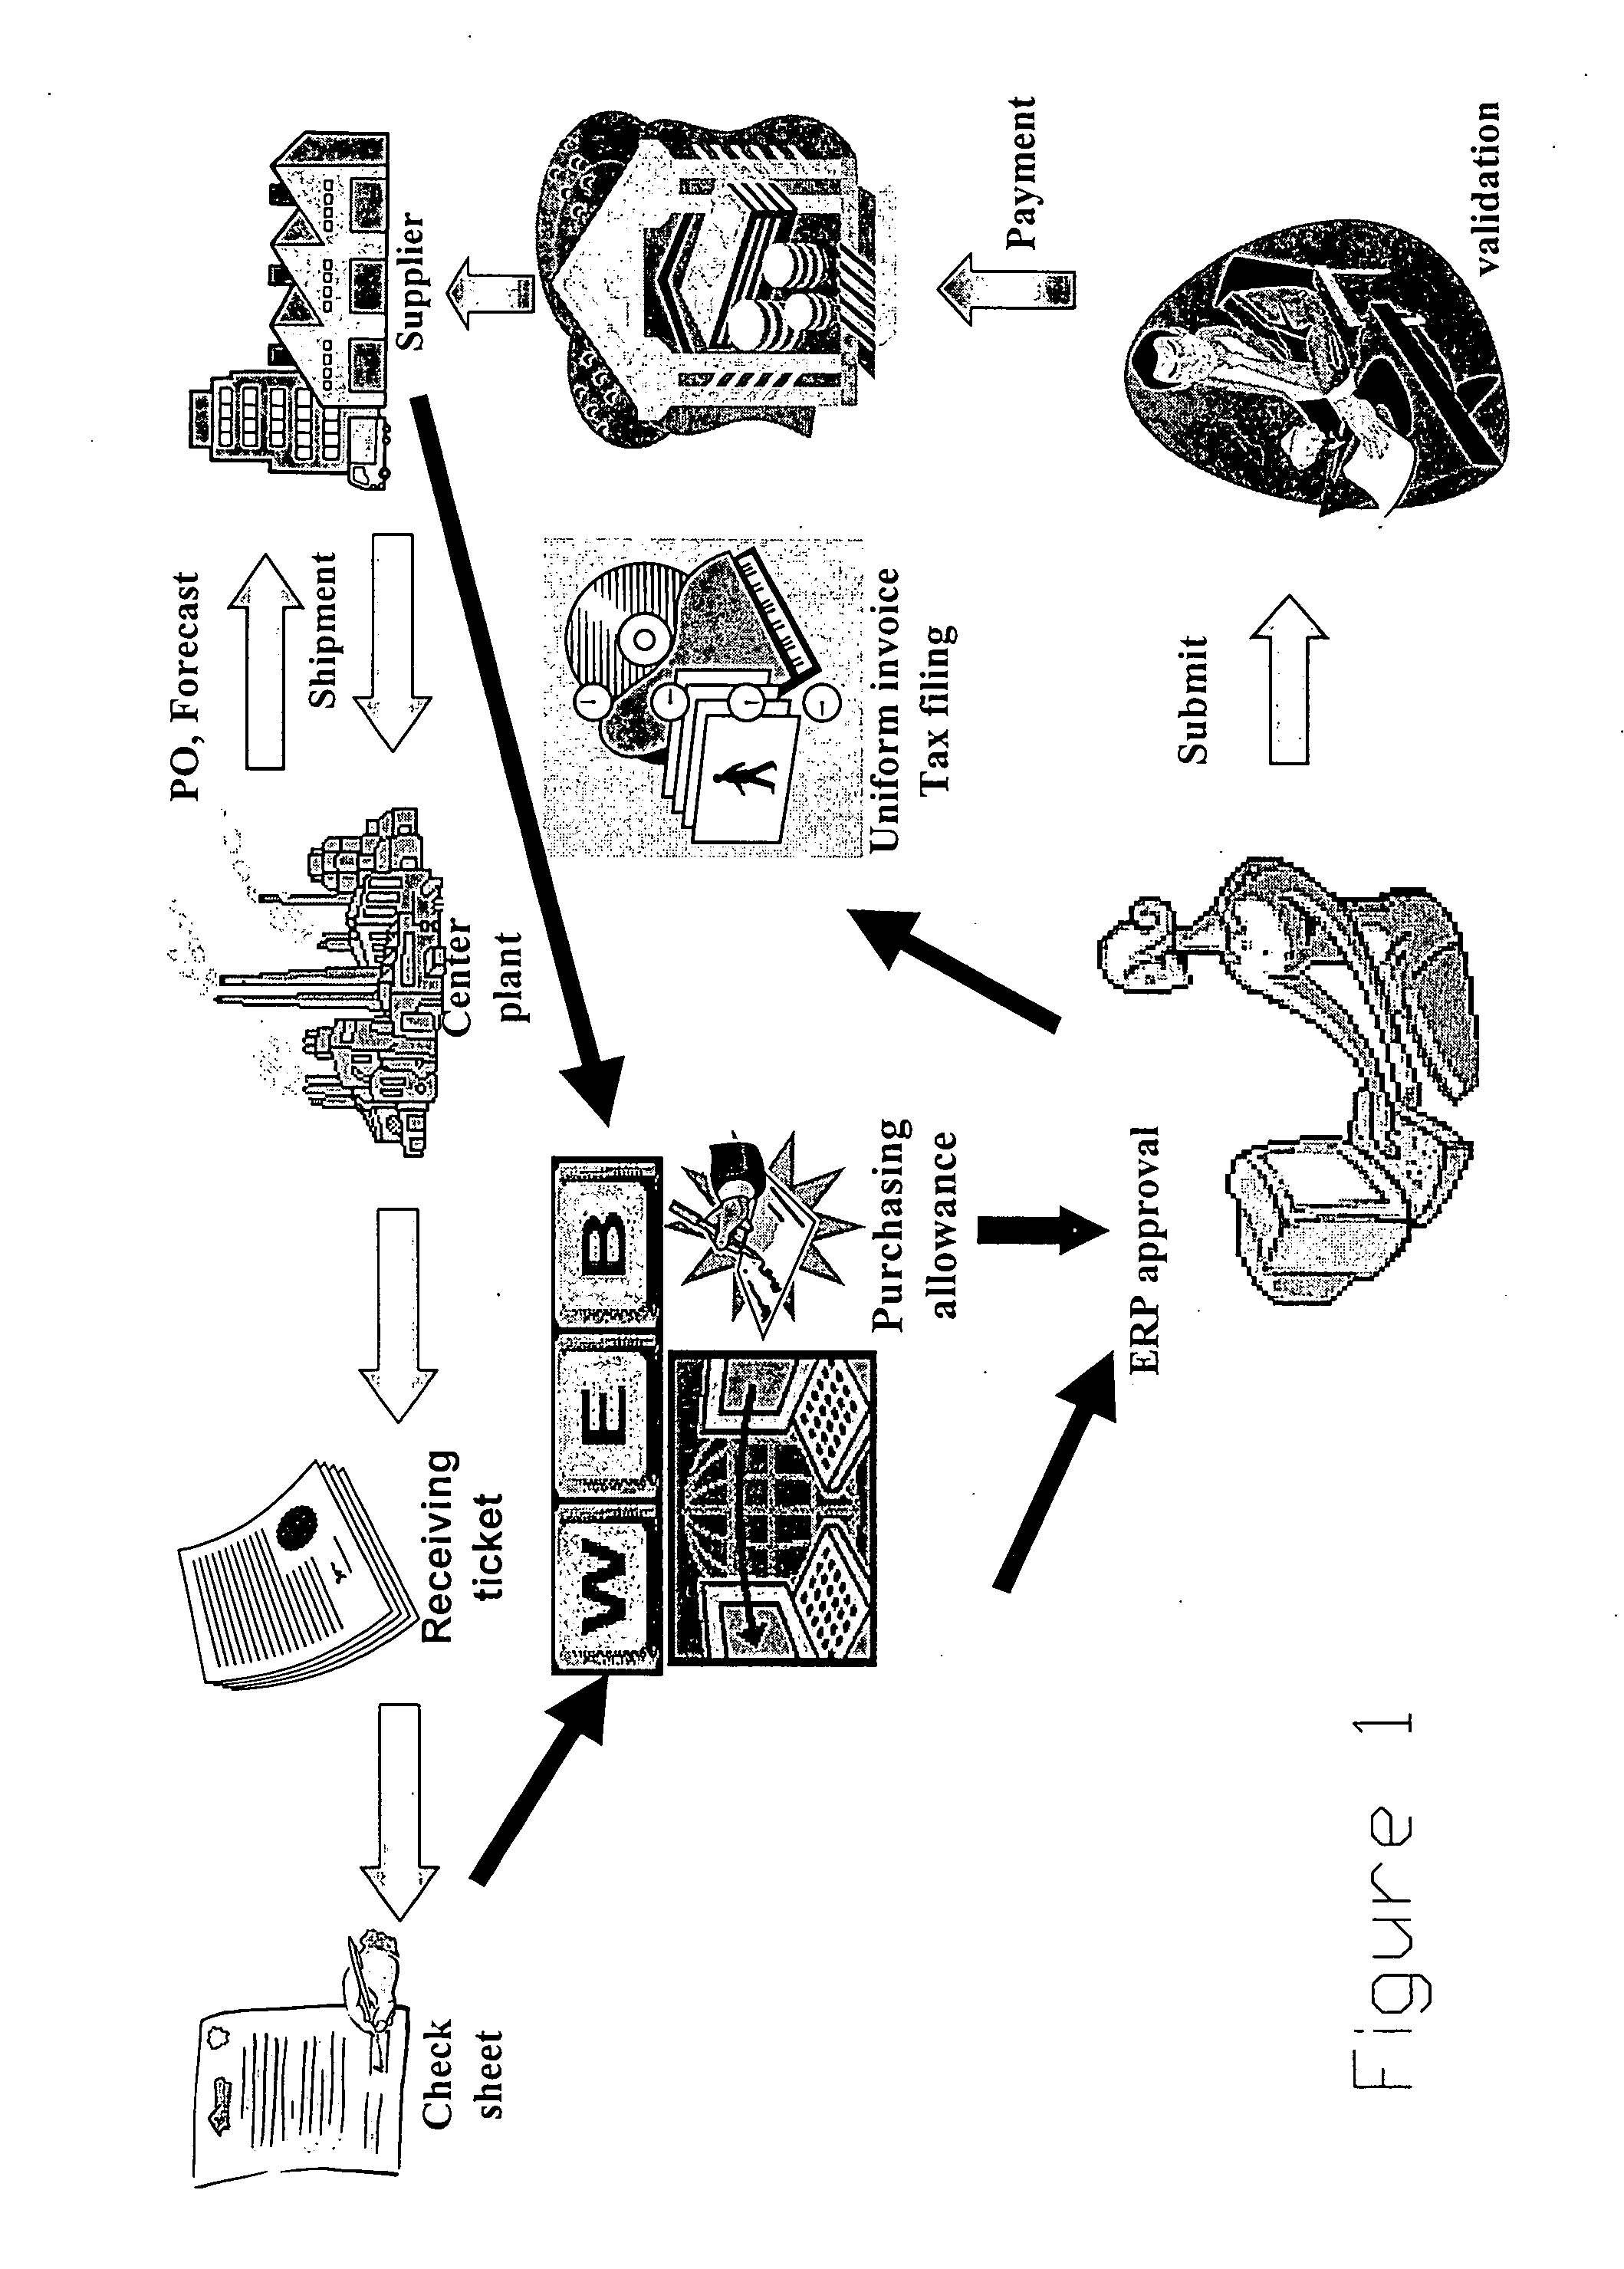 On-line billing system and method of the same